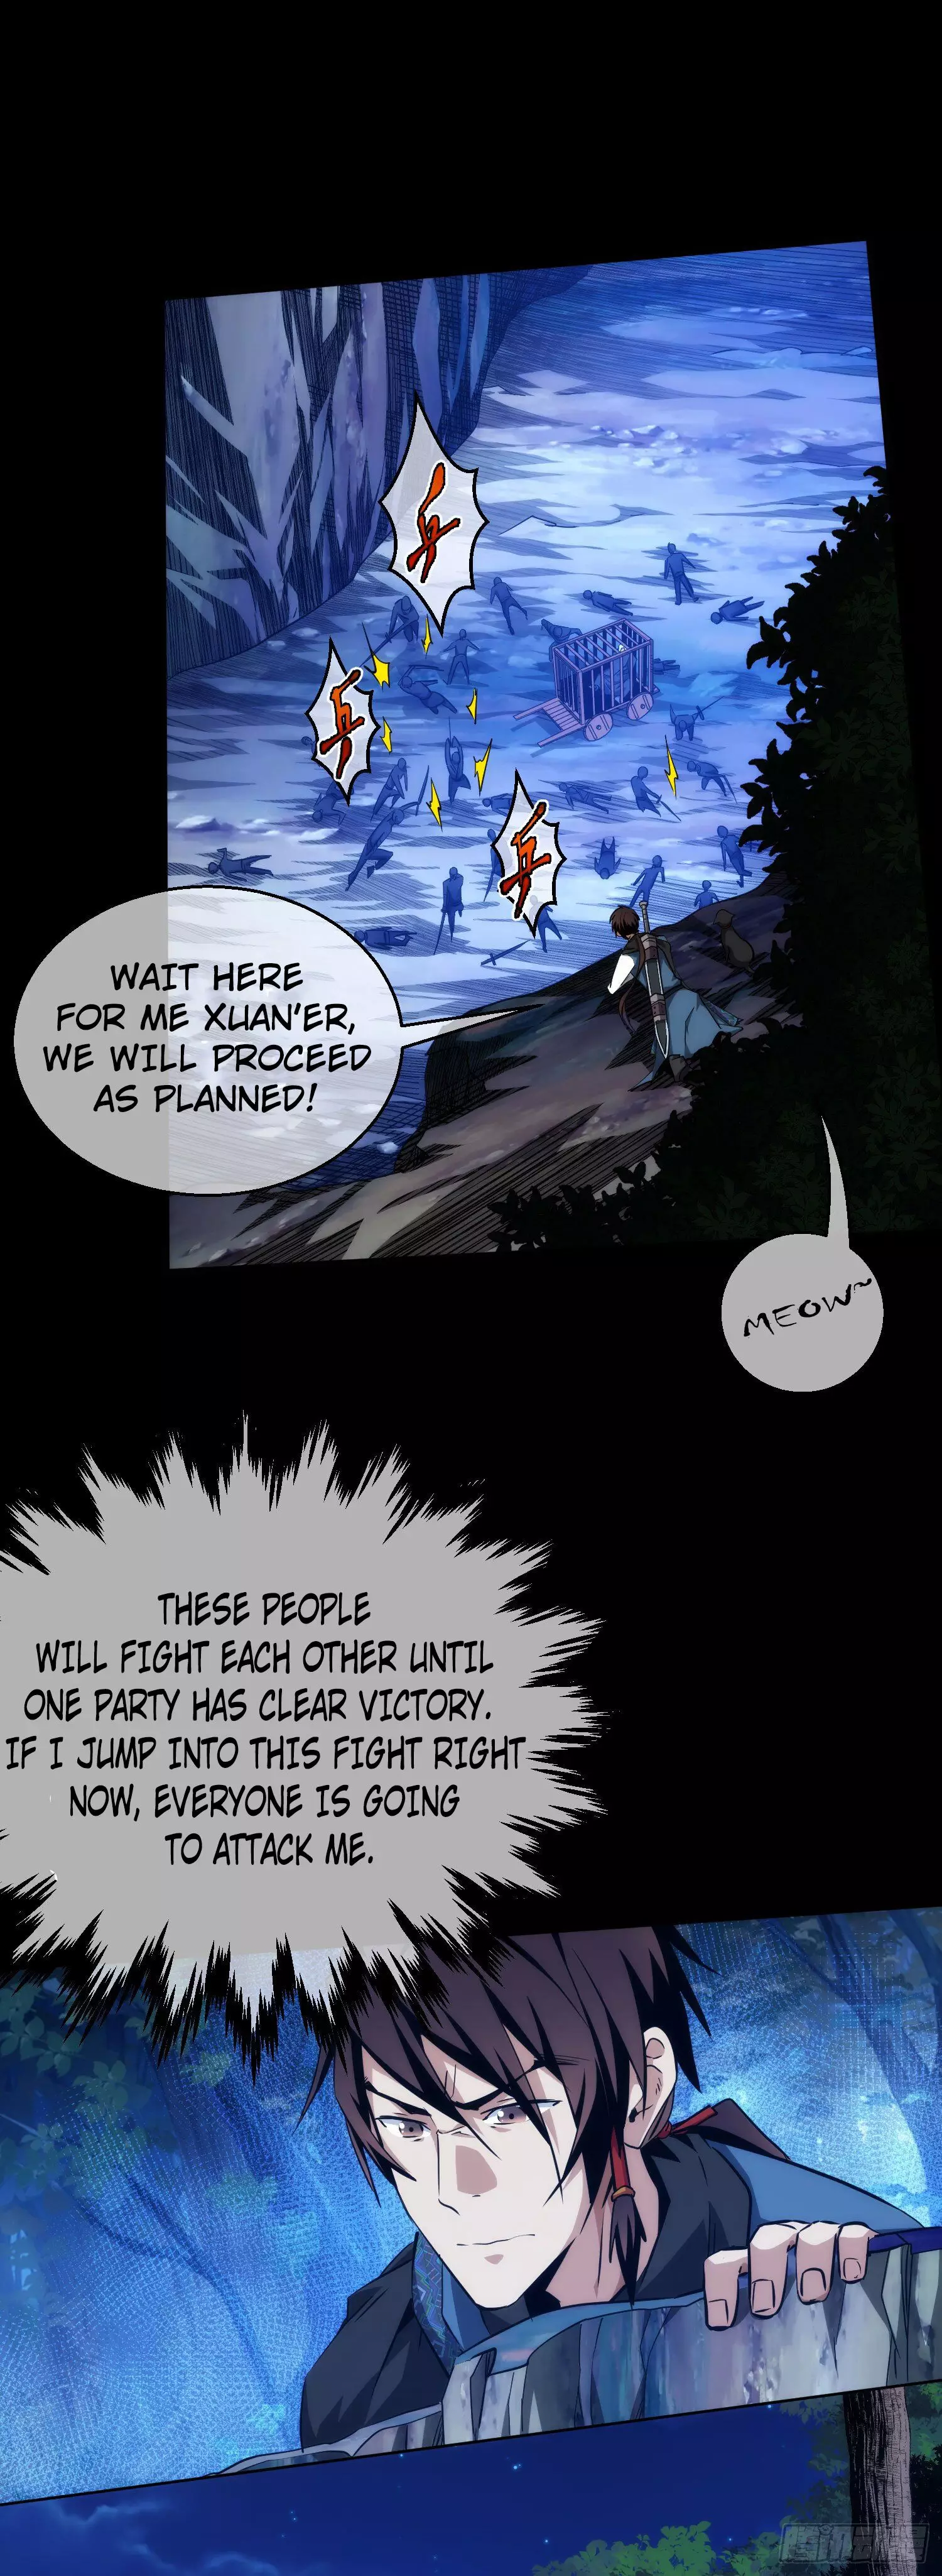 The Hidden Blade - 19 page 2-43120775